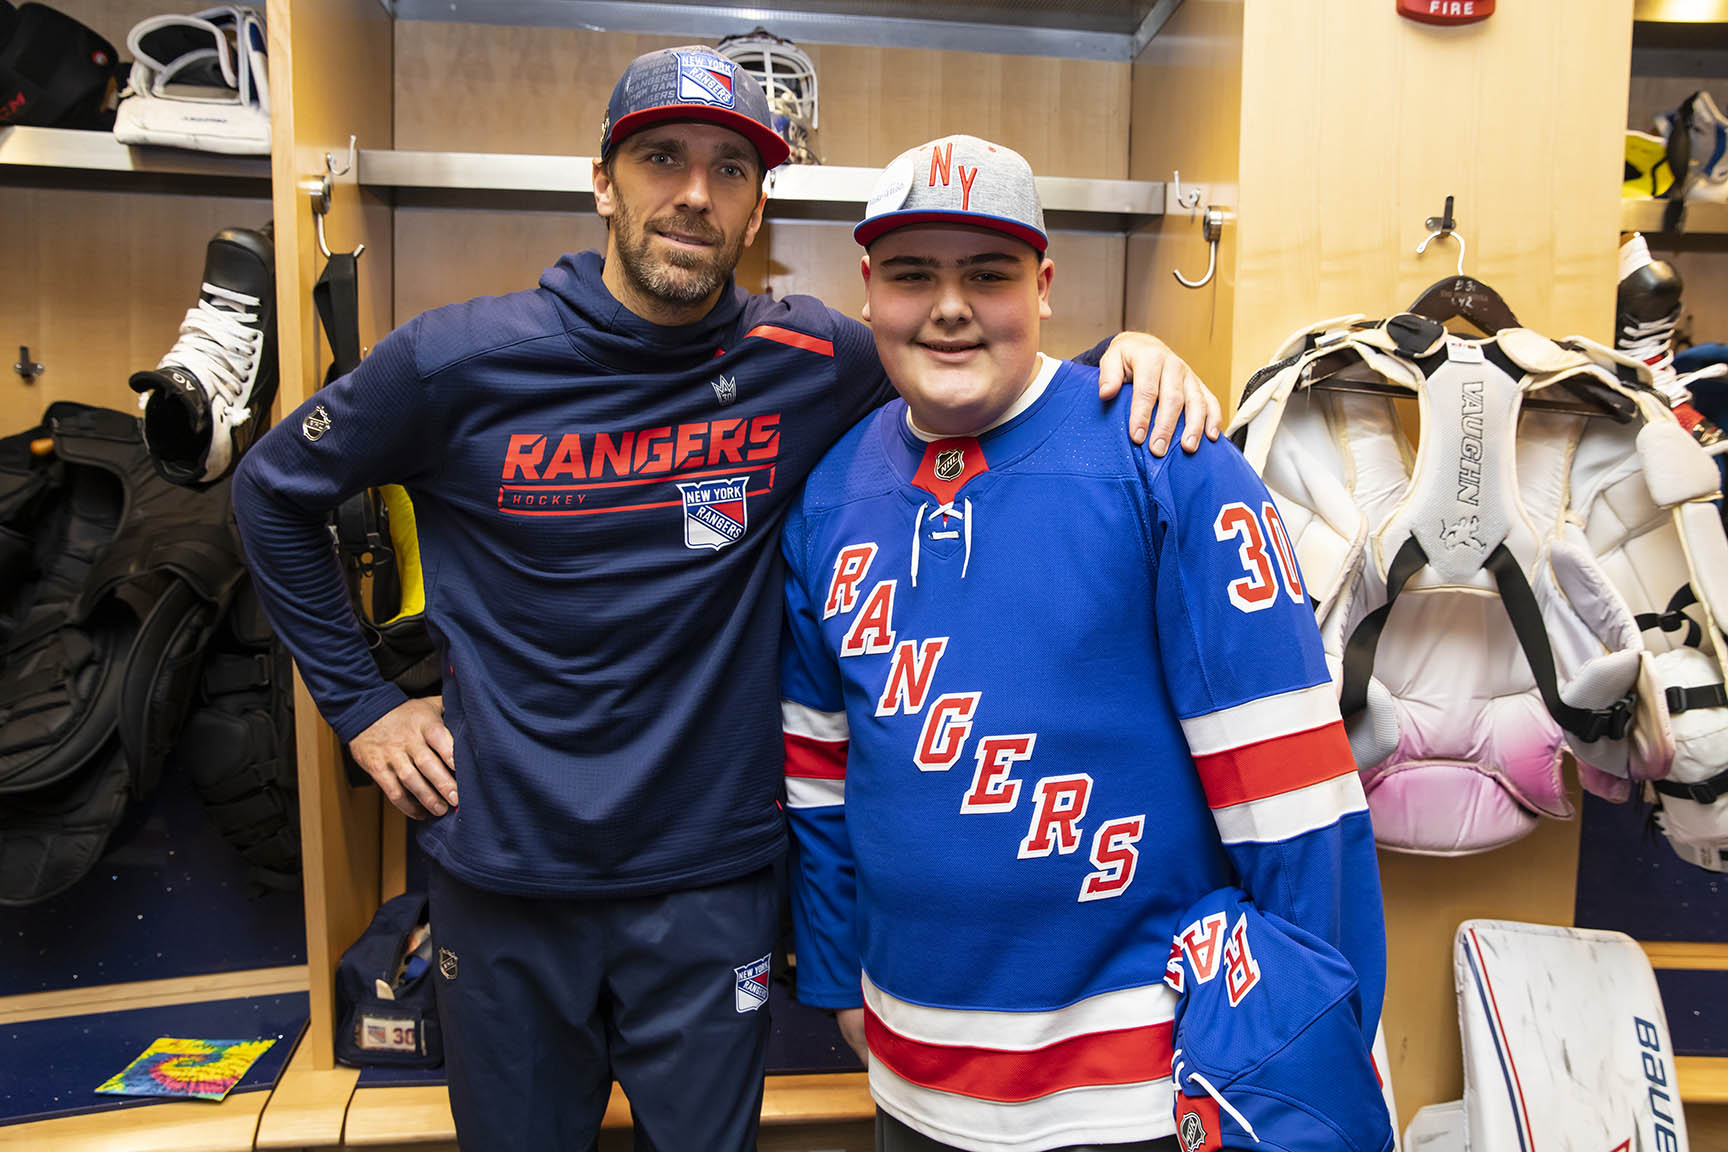 In February 2019 CJ from Make A Wish Suffolk had his wish come true when he met with Henrik at Casino night and post a NYR game. He says no matter the health obstacles he faces, the NYR and his favorite player Henrik always makes him smile.